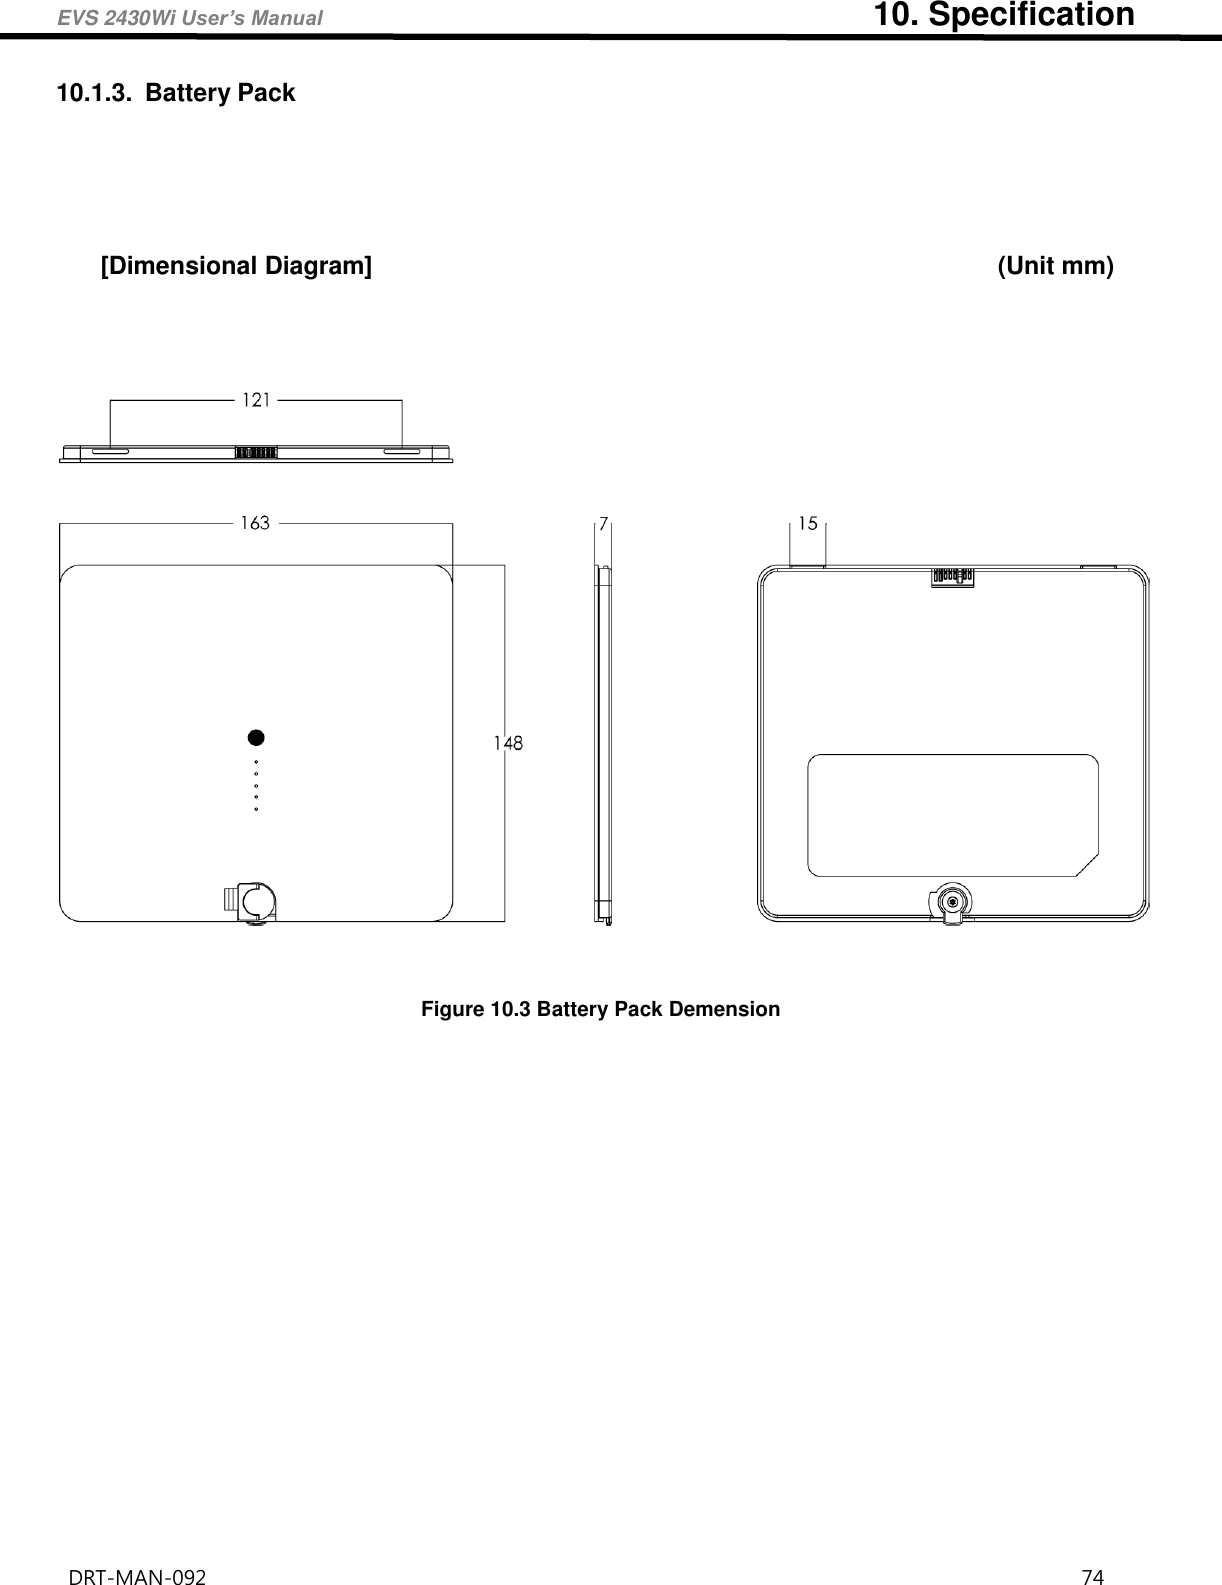 EVS 2430Wi User’s Manual                                                                  10. Specification DRT-MAN-092                                                                                    74   10.1.3.  Battery Pack      [Dimensional Diagram]                                                               (Unit mm)         Figure 10.3 Battery Pack Demension     